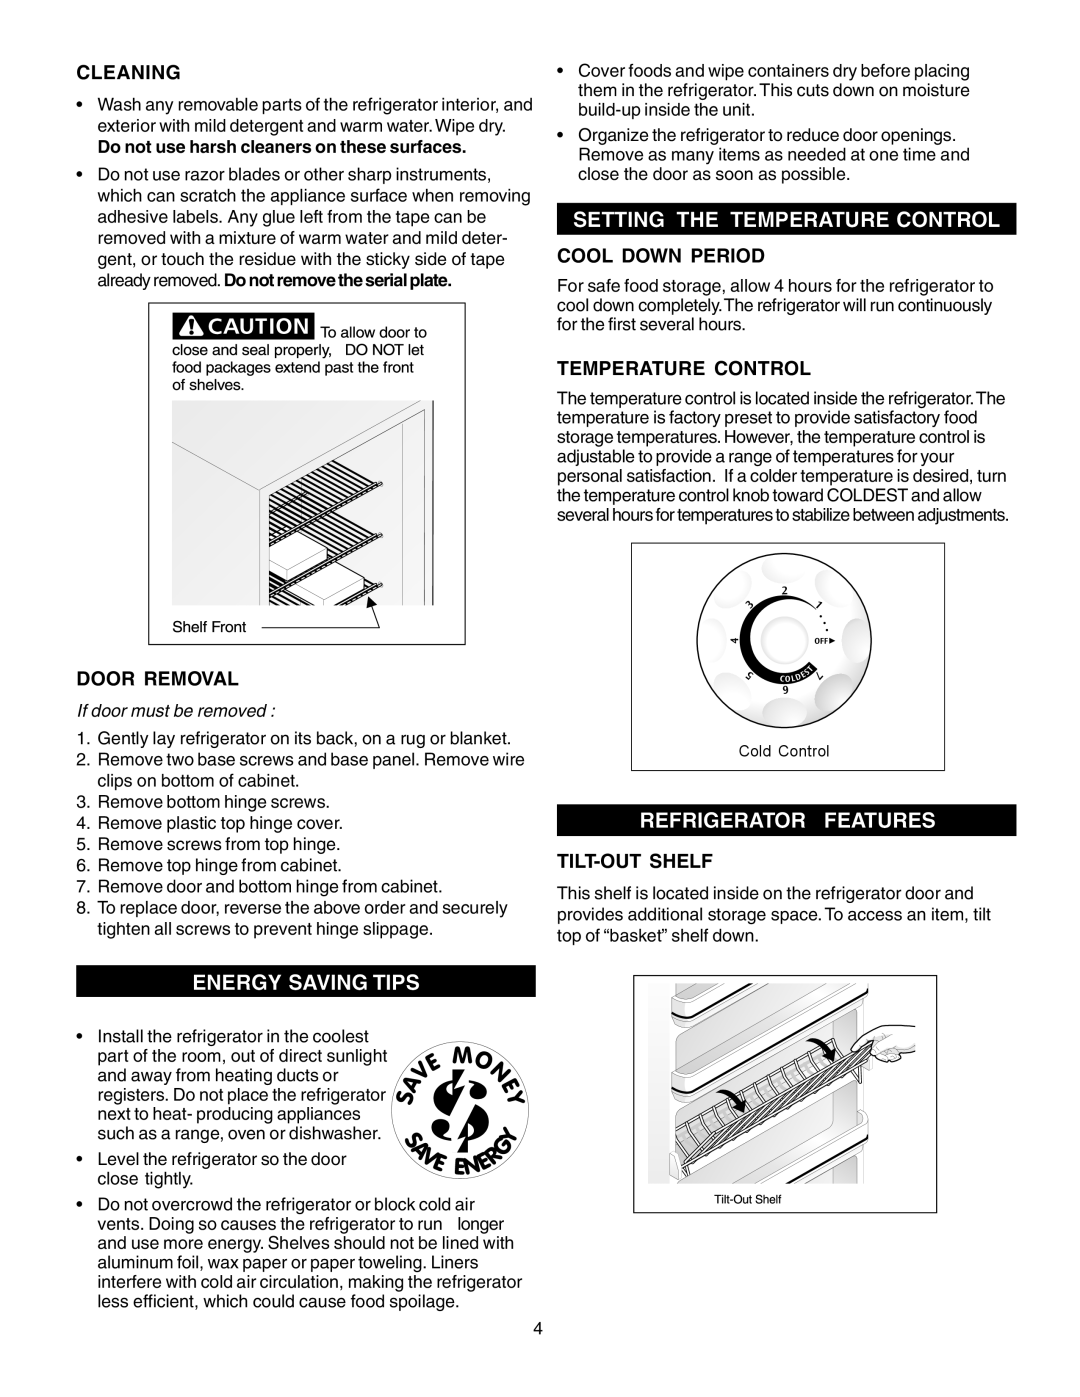 Frigidaire 297081000 Setting The Temperature Control, Energy Saving Tips, Refrigerator Features, Cleaning, Door Removal 